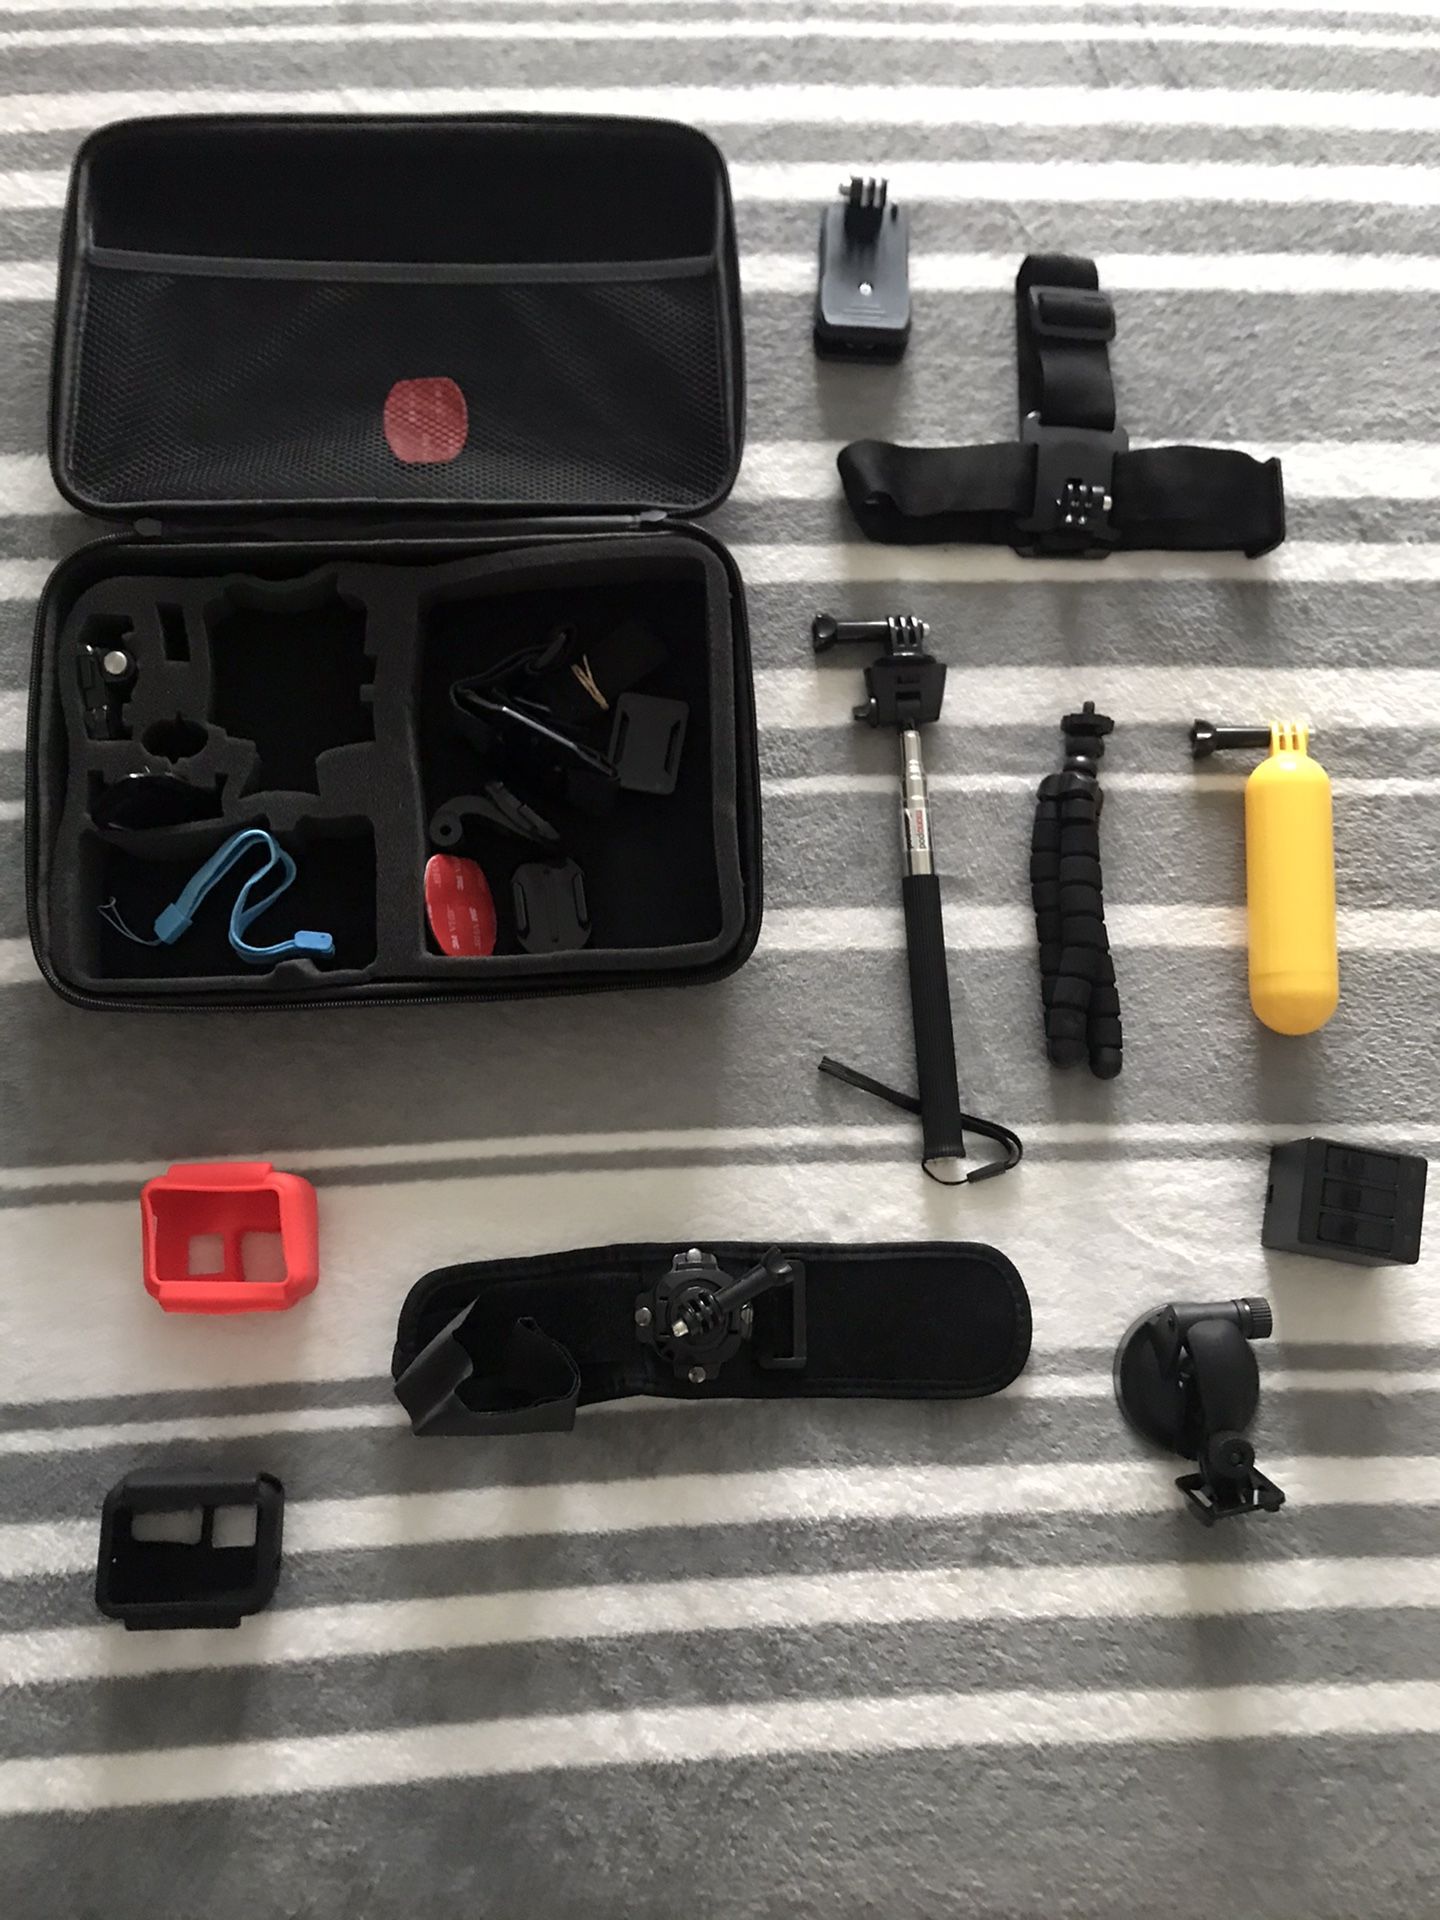 Go Pro Accessory Kit - With silicon cover and 3 extra battery